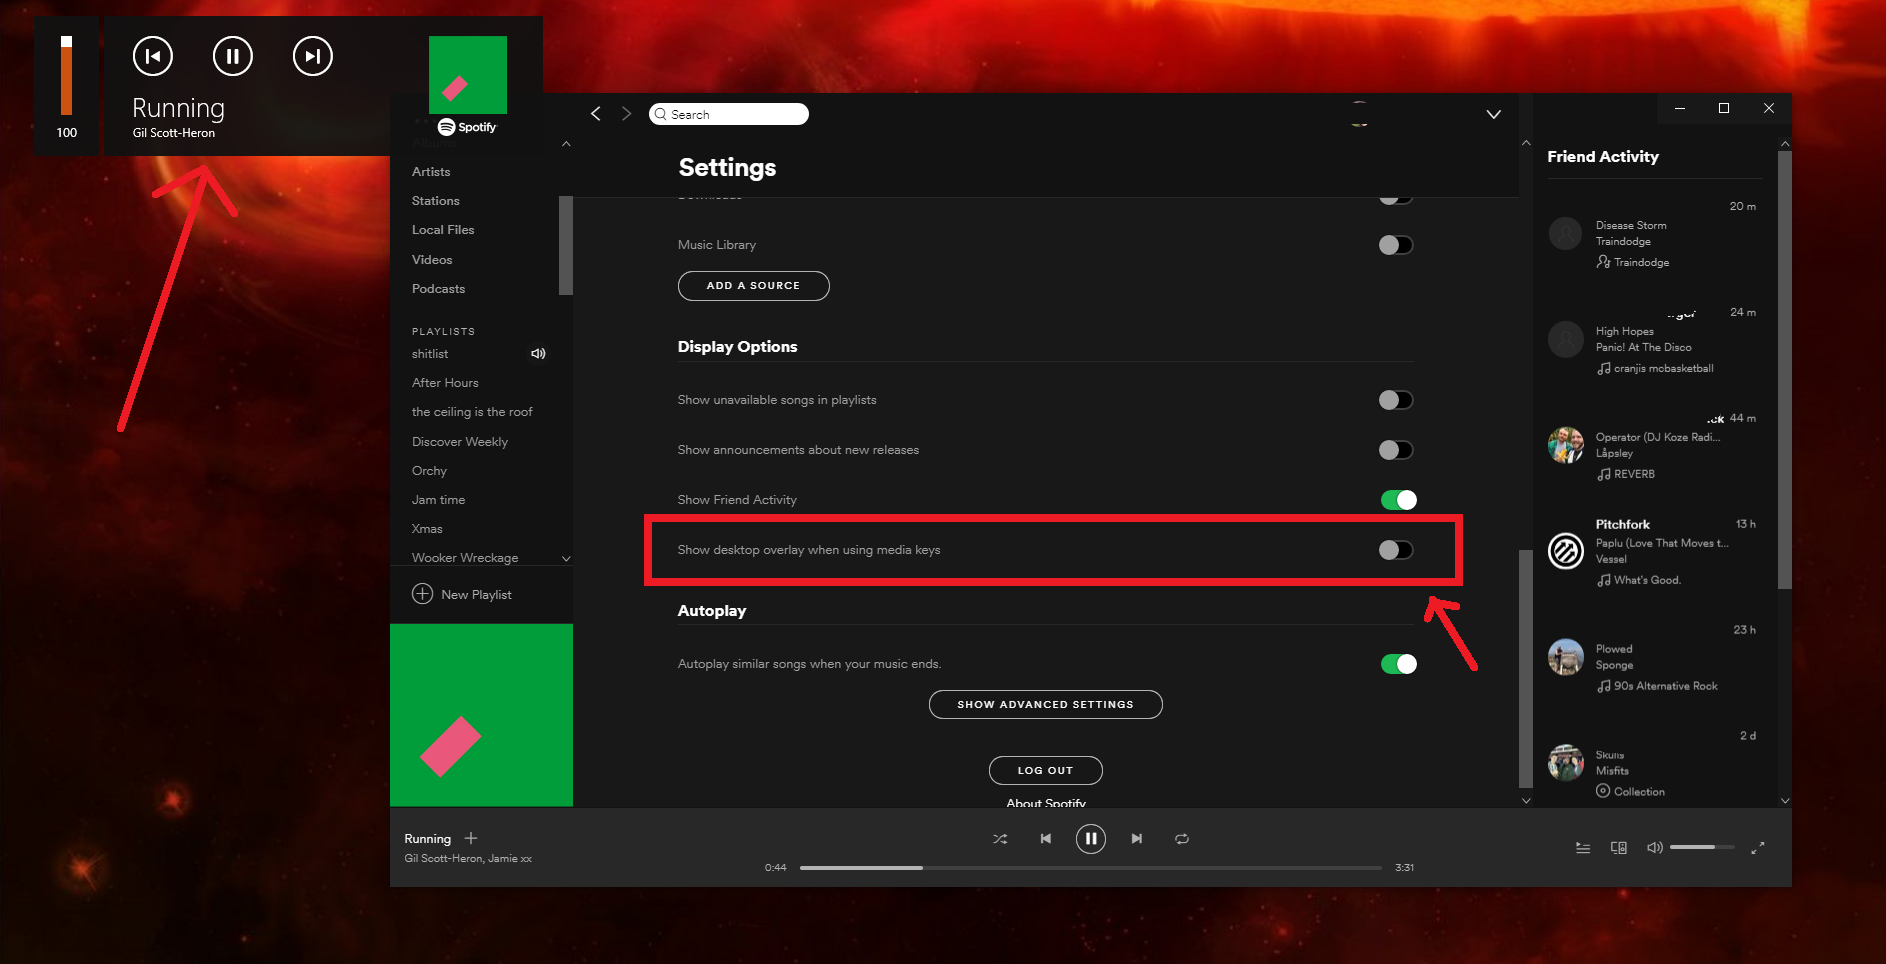 Media Overlay keeps reappearing - Page 3 - The Spotify Community